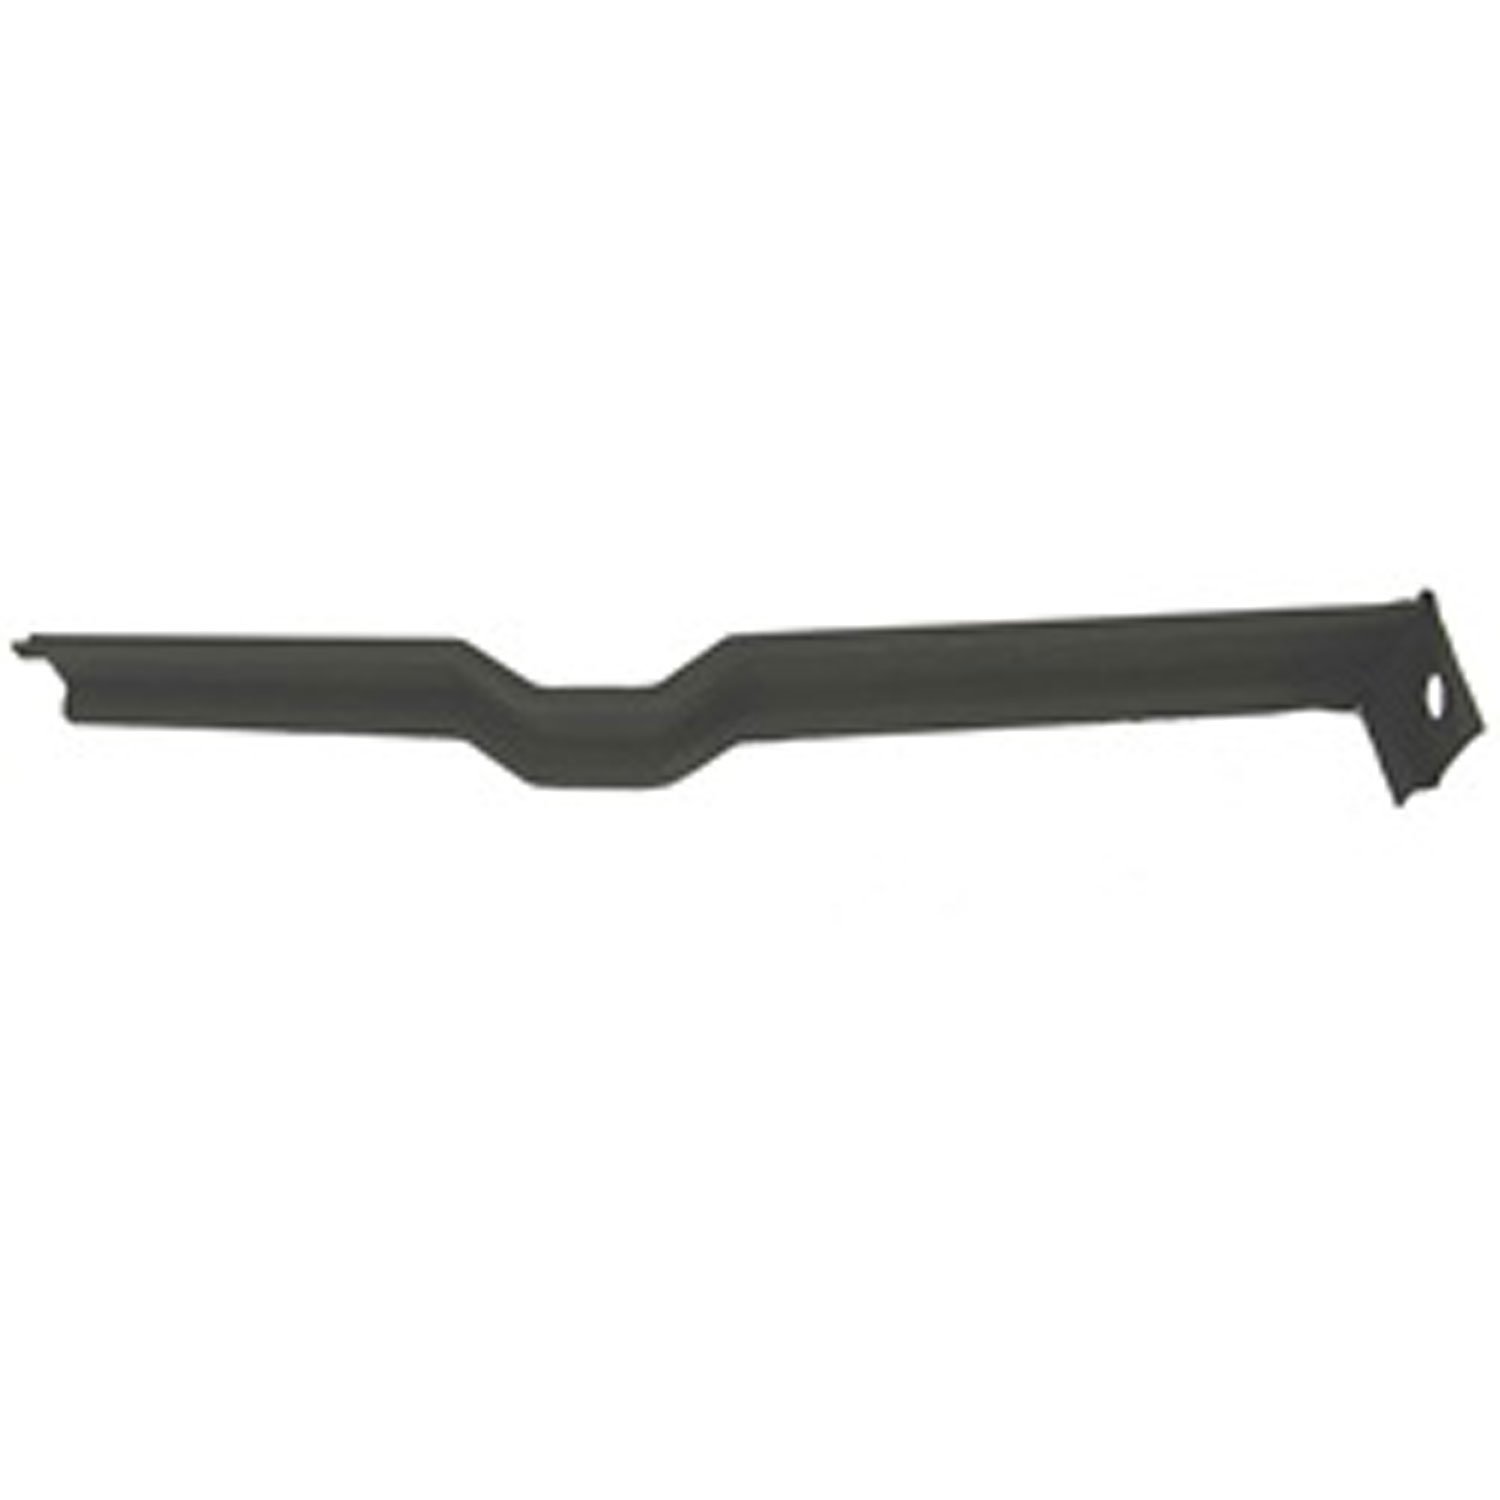 This rear outer floor bracket from Omix-ADA fits 41-45 Willys MB and Ford GPW.